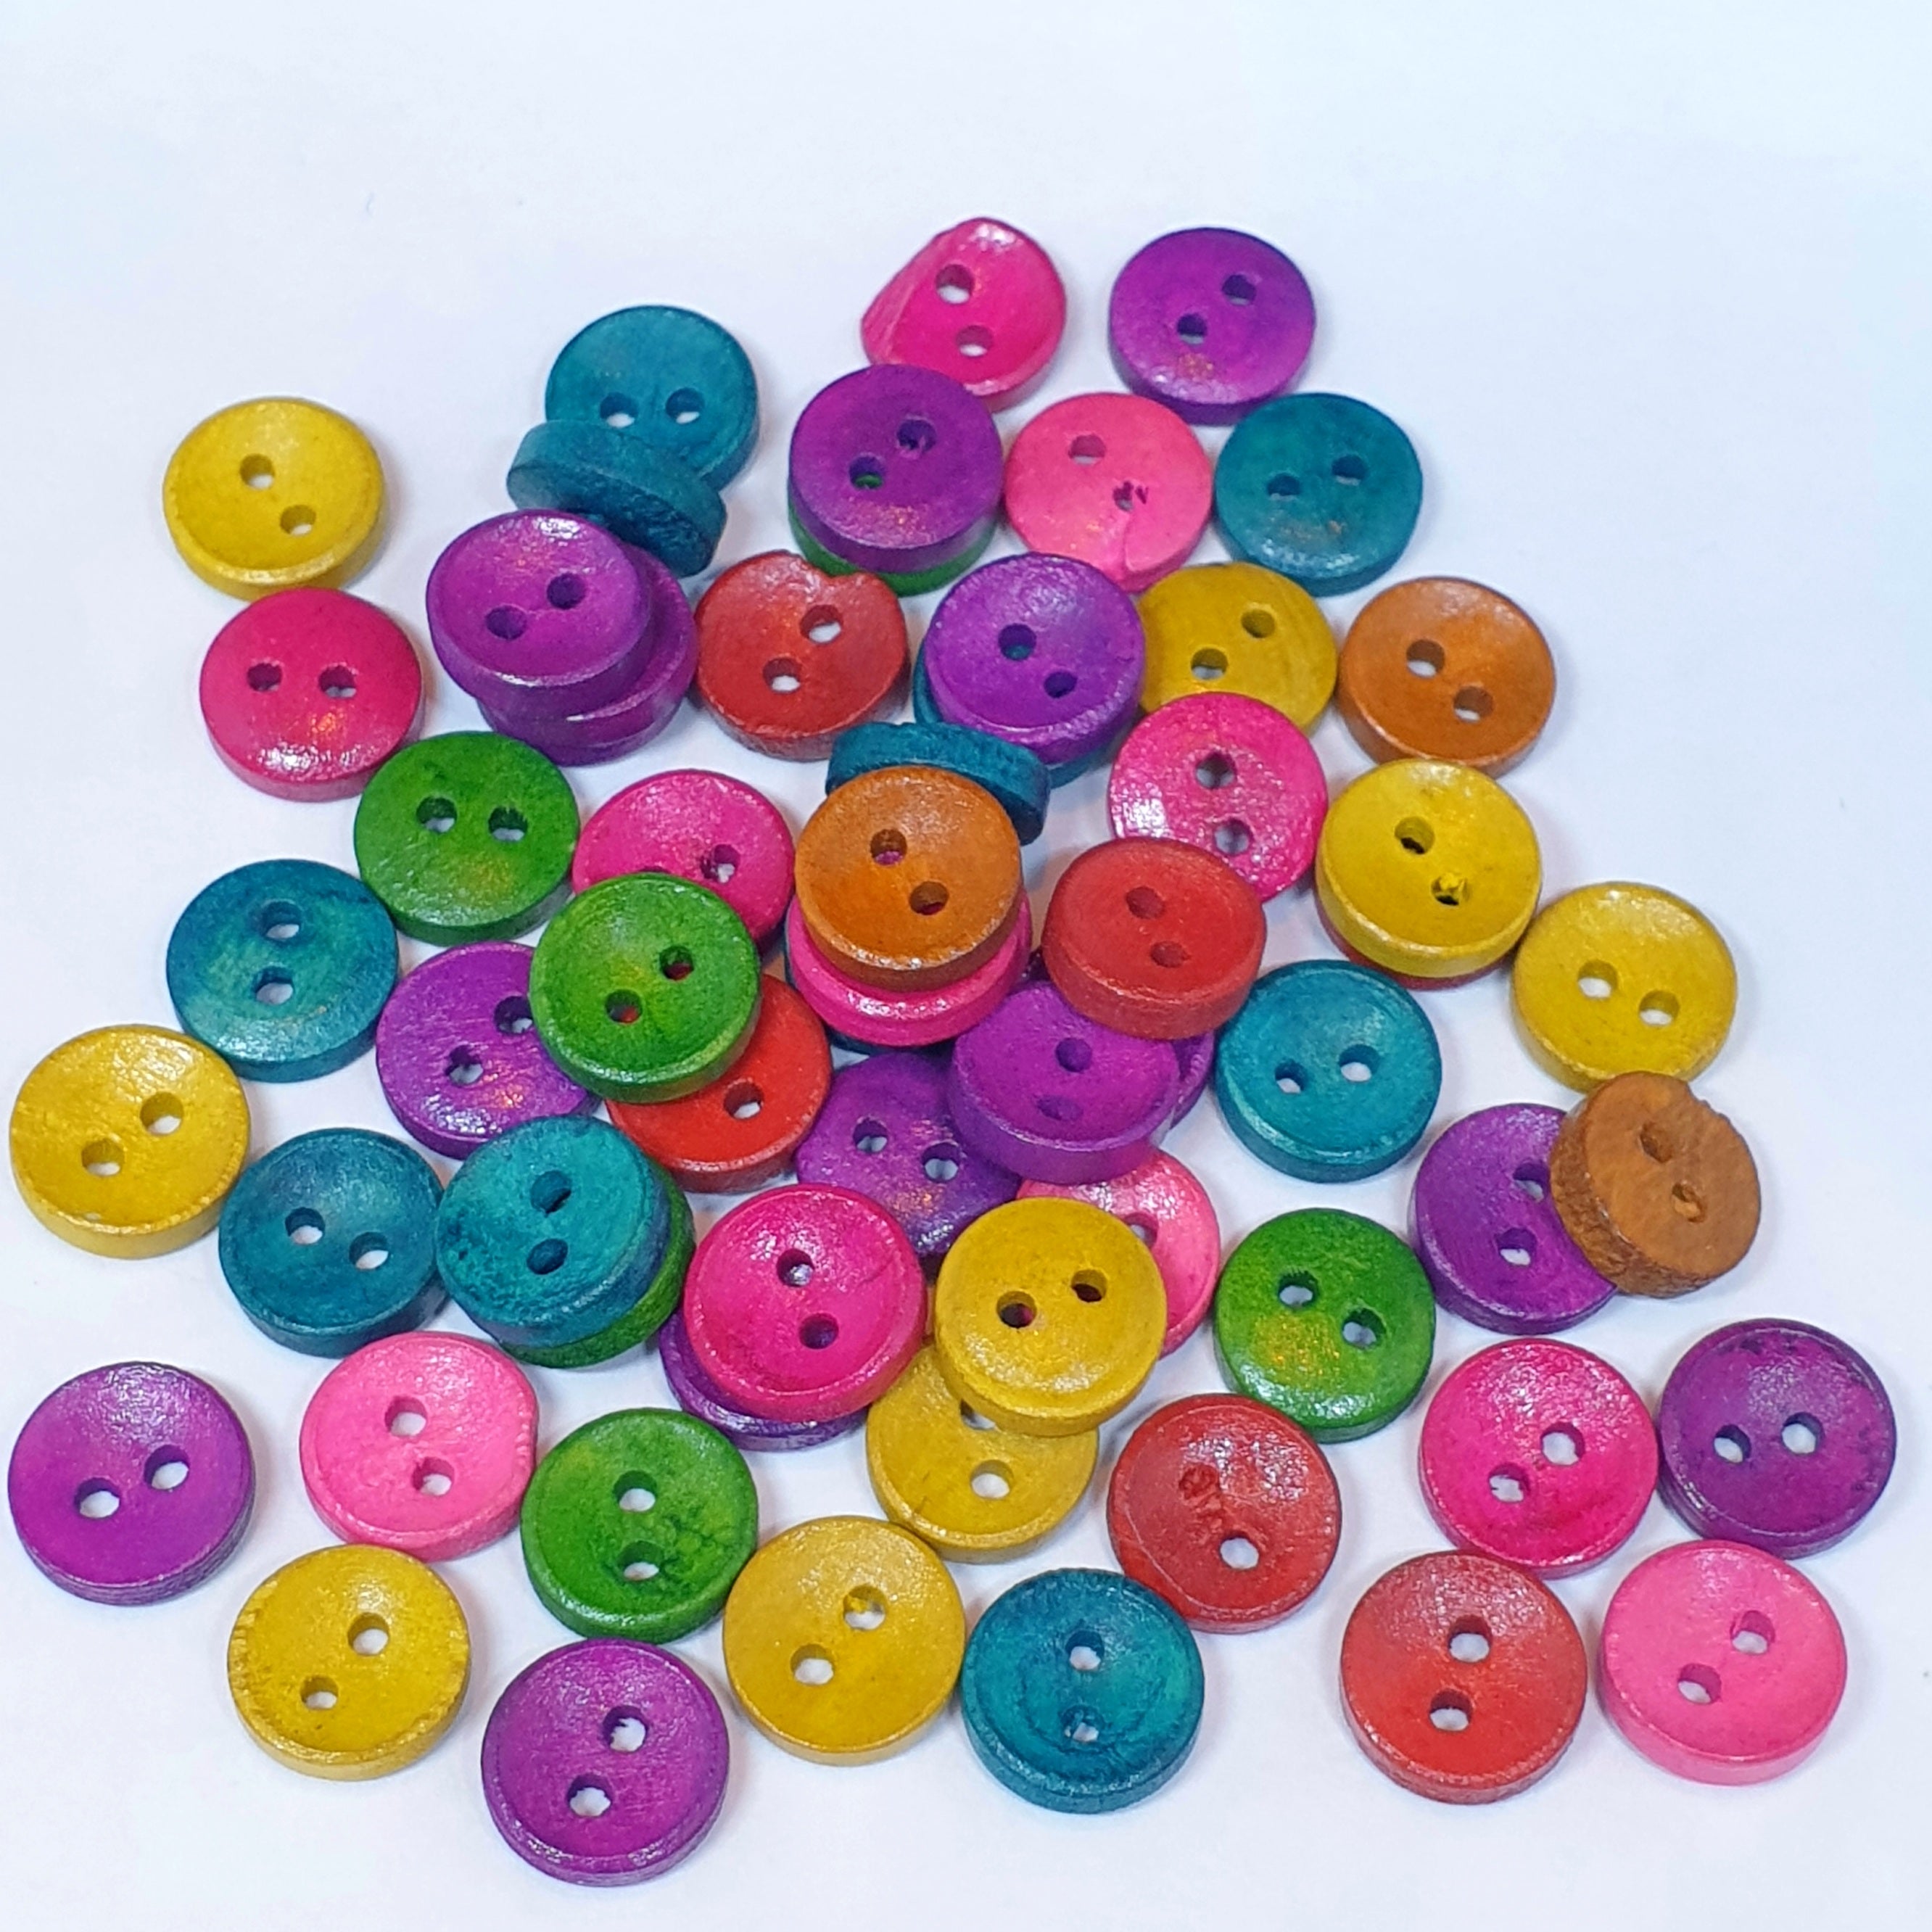 MajorCrafts 48pcs 10mm Random Mixed Colours Plain Round 2 Holes Small Wooden Sewing Buttons